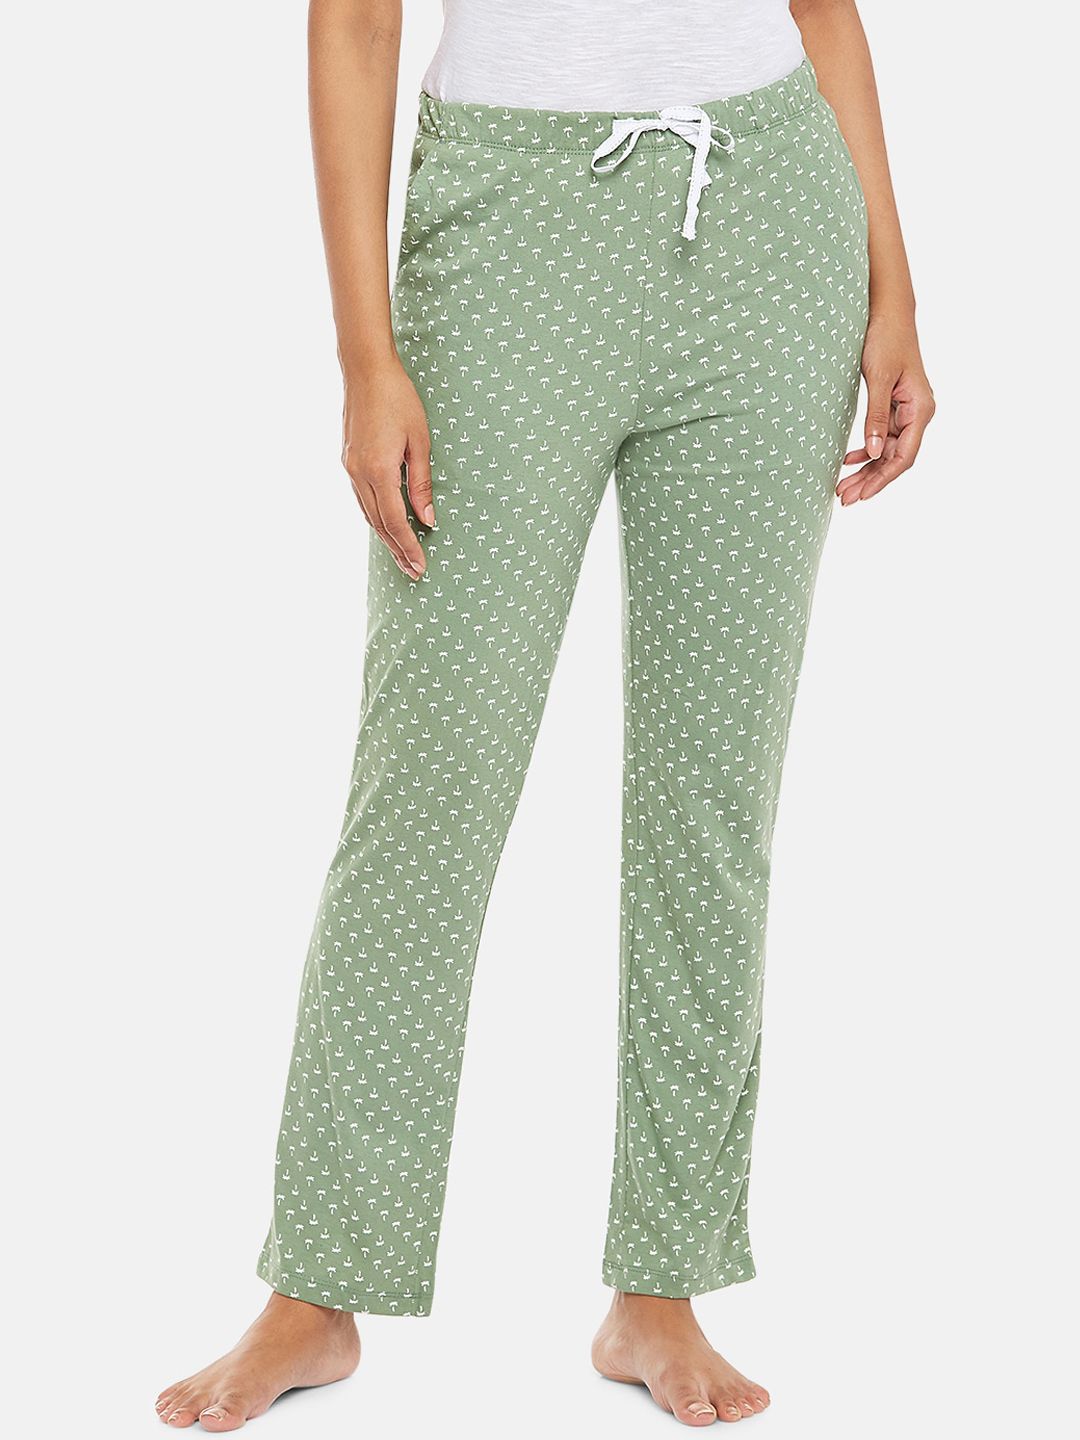 Dreamz by Pantaloons Women Green Printed Lounge Pants Price in India